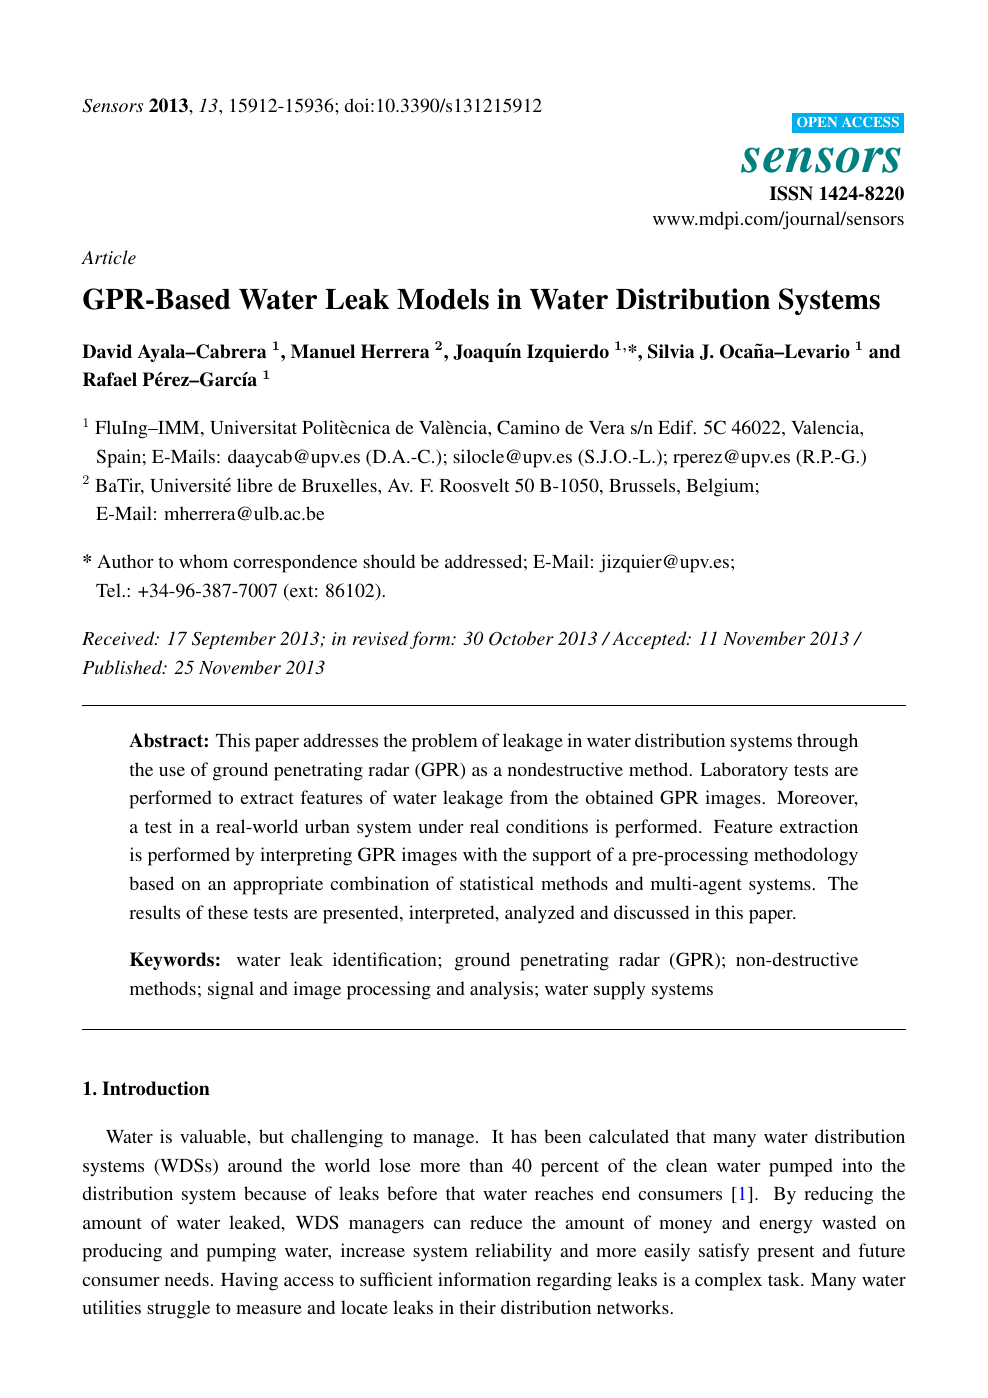 Gpr Based Water Leak Models In Water Distribution Systems Topic Of Research Paper In Earth And Related Environmental Sciences Download Scholarly Article Pdf And Read For Free On Cyberleninka Open Science Hub